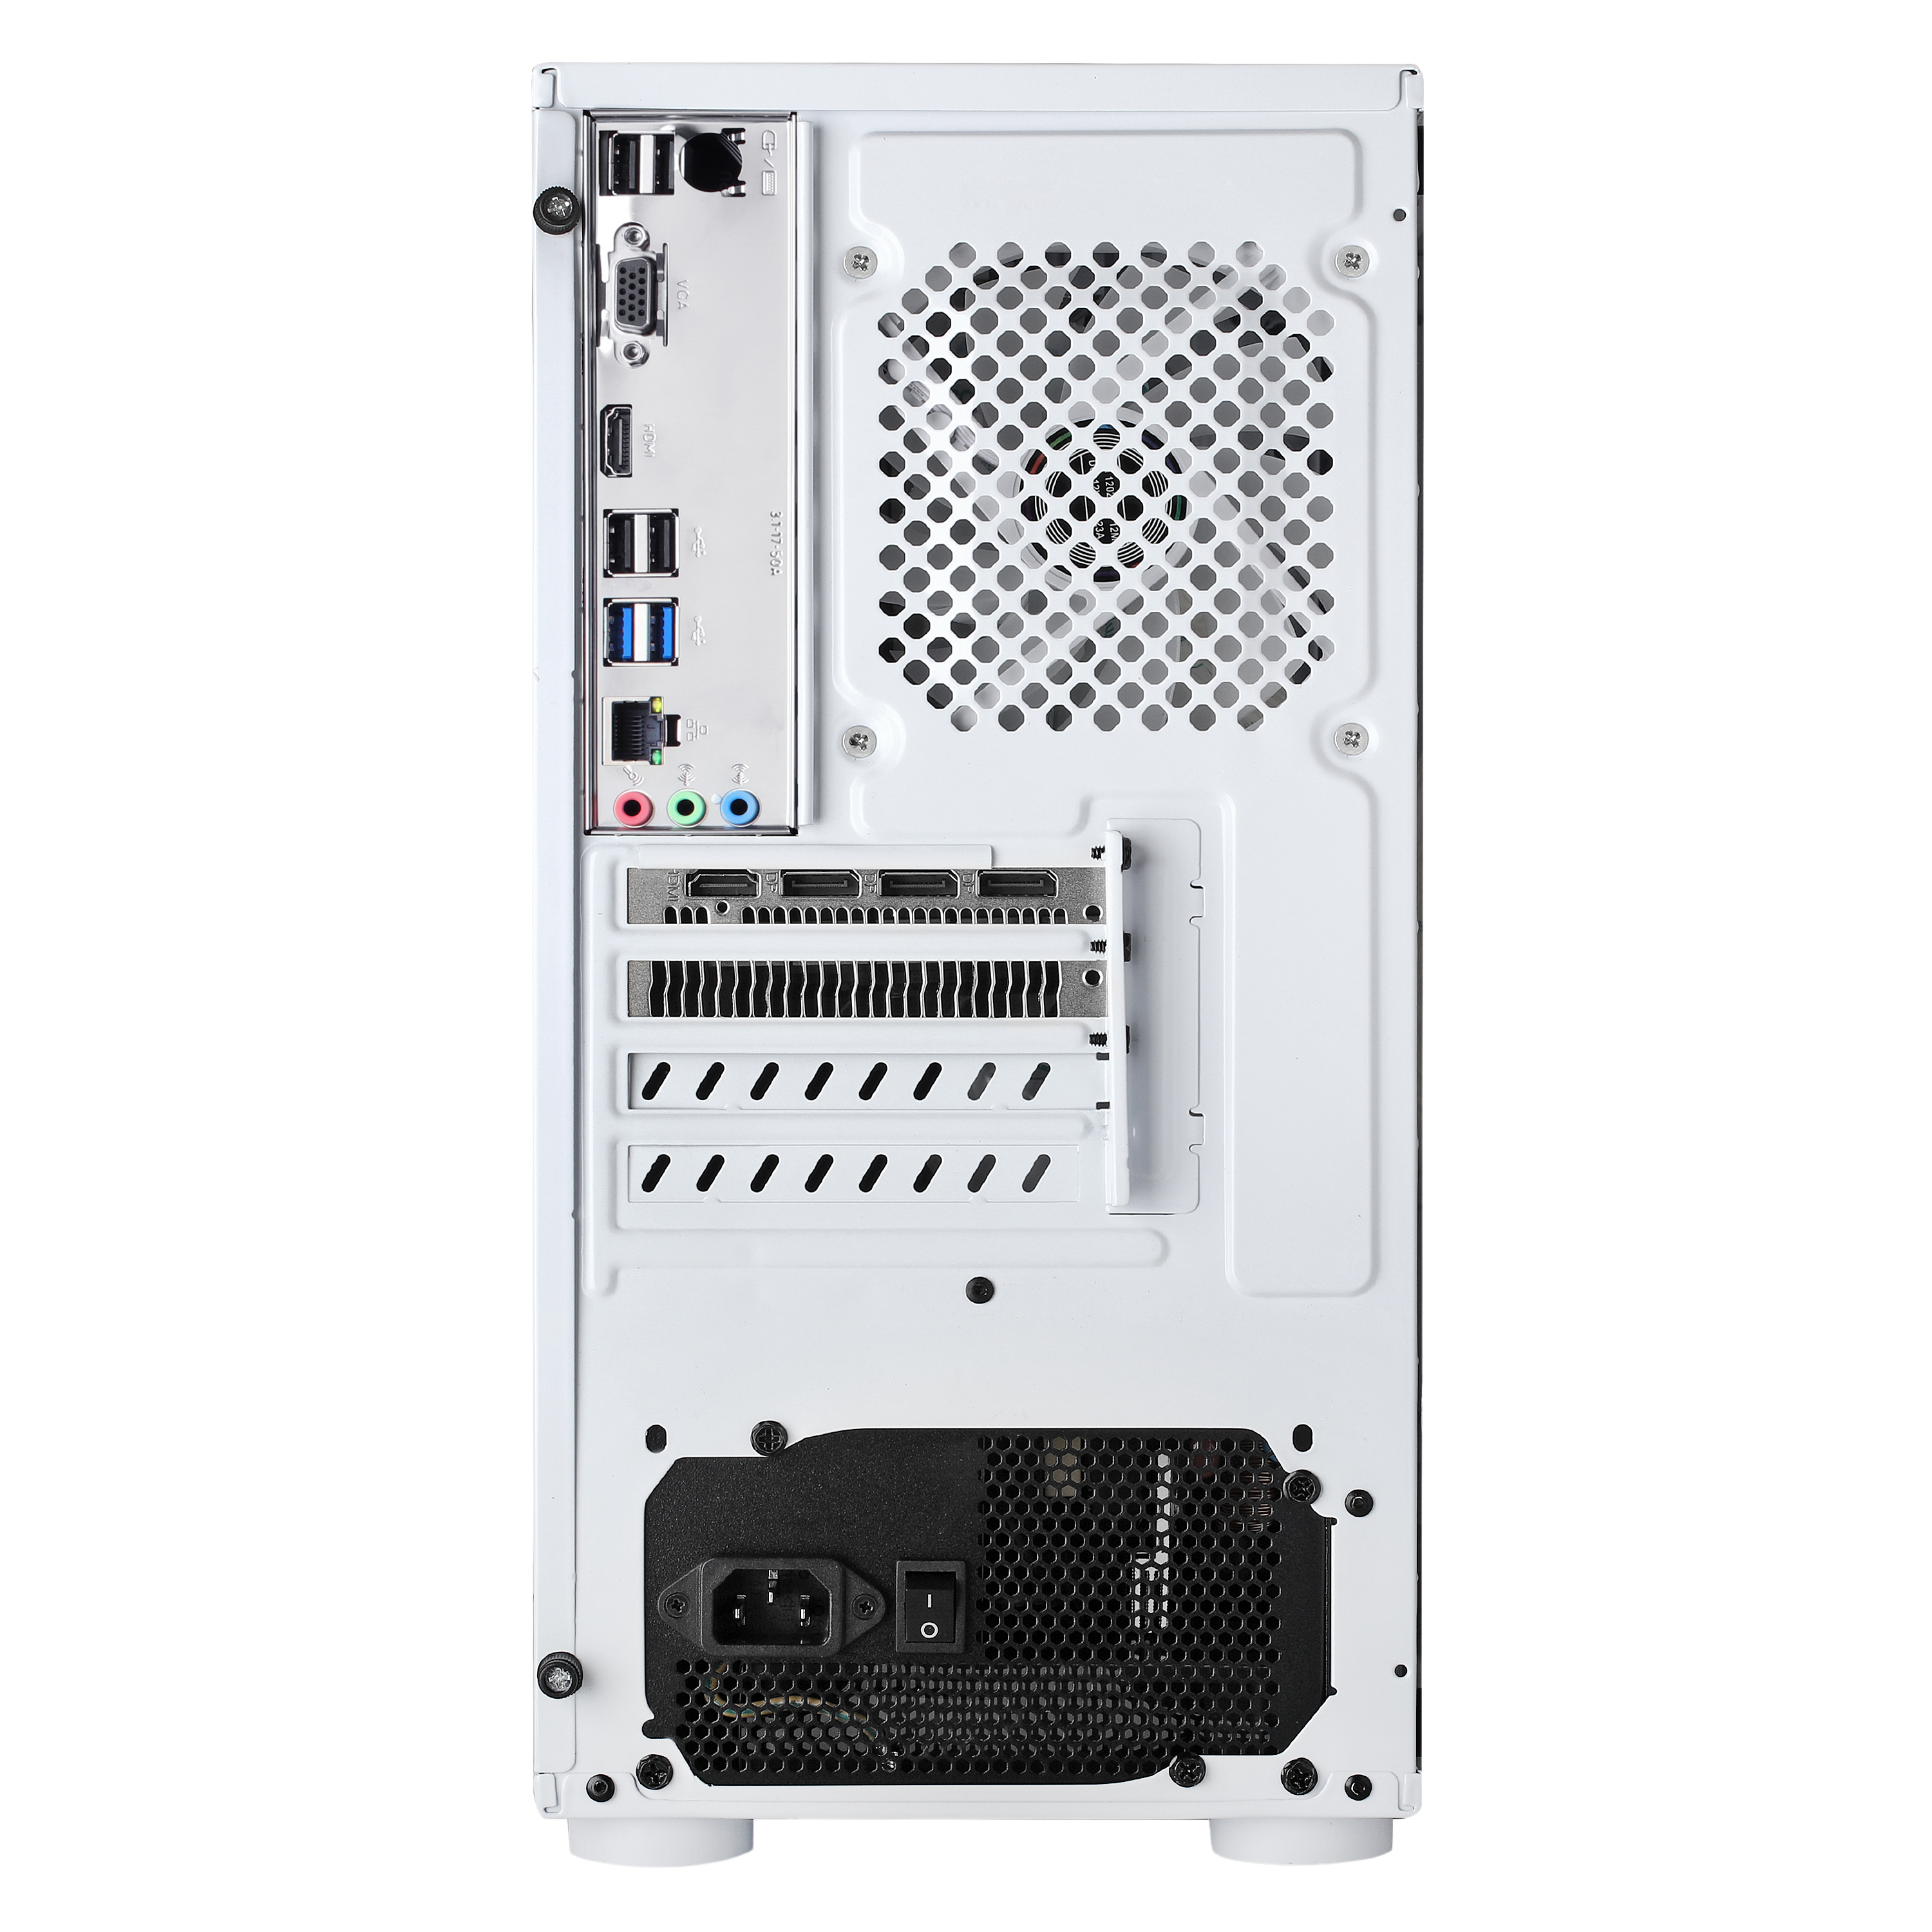 Rear panel ports of a white gaming PC case showing various connectivity options